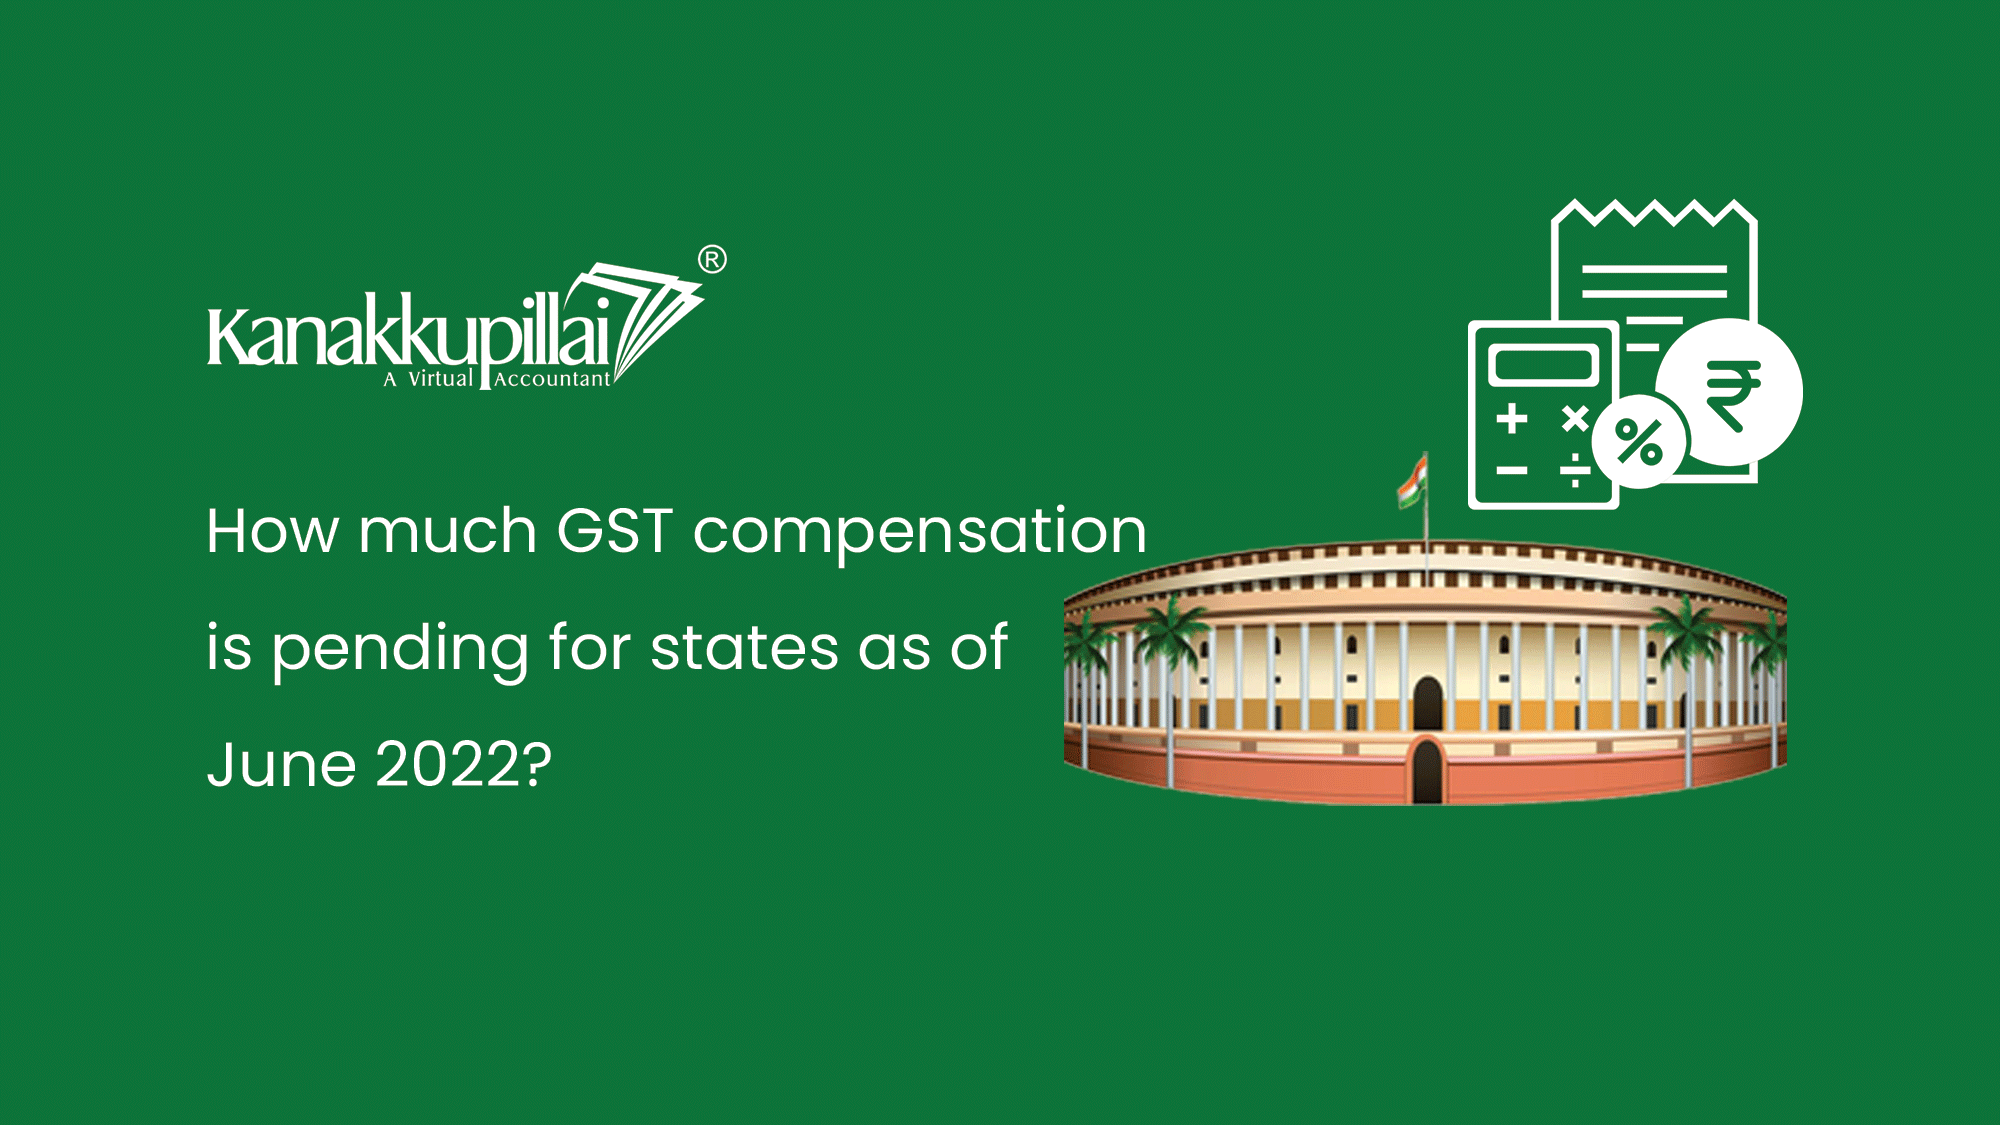 How much GST compensation is pending for states as of June 2022?